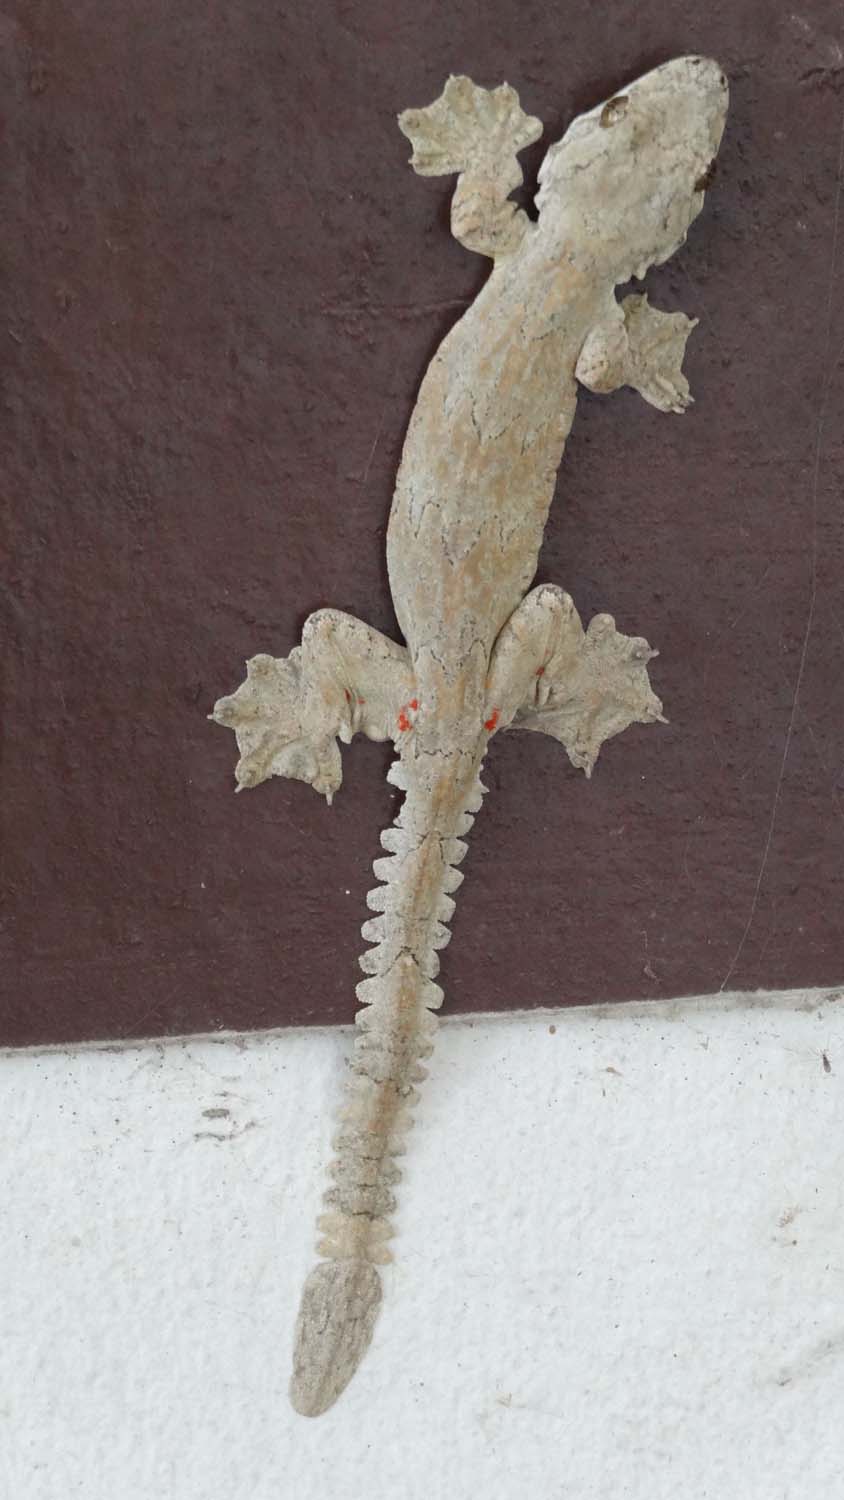 super cool type of gecko